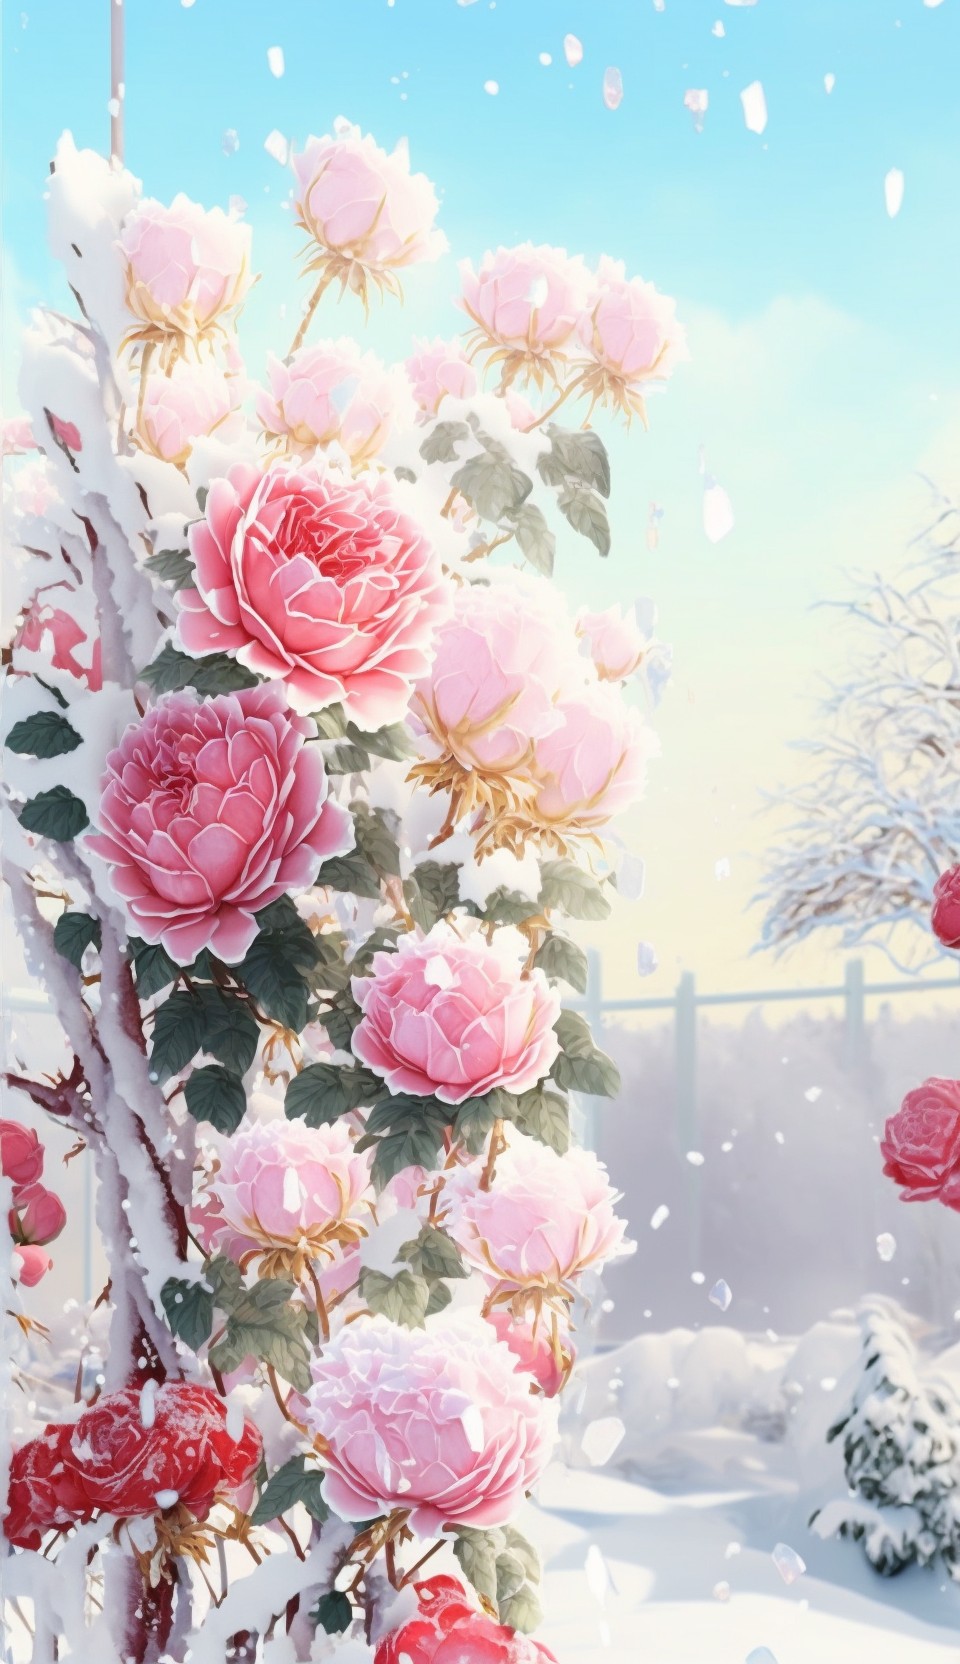 5 images of roses in snow by Midjourney